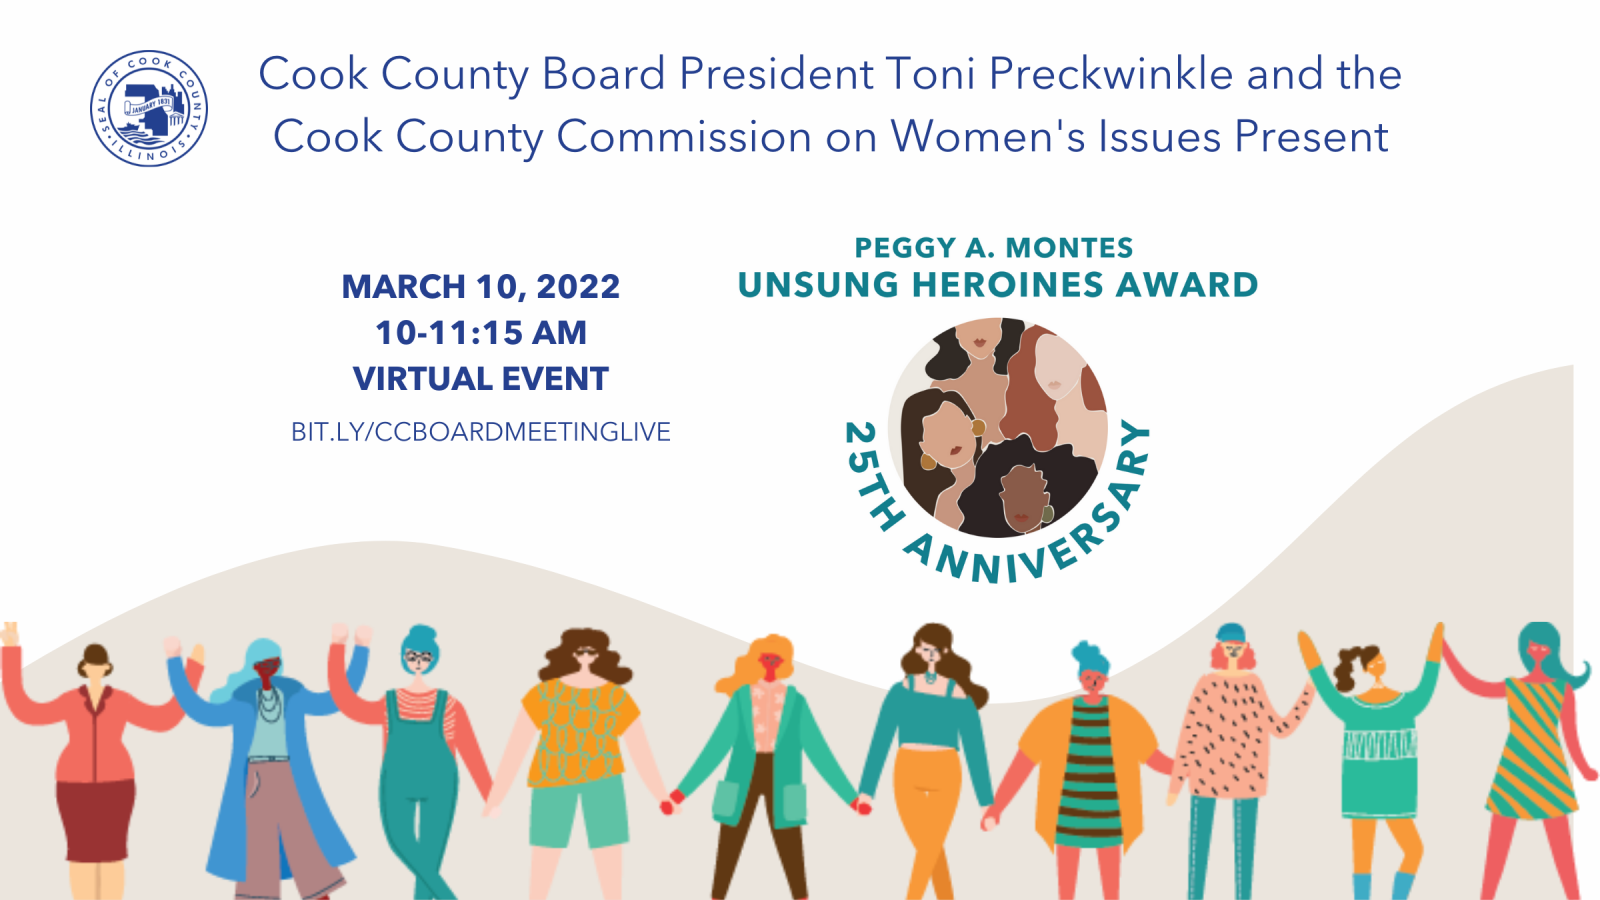 Peggy A. Montes Unsung Heroines Award 25th Anniversary March 10, 2022, 10 - 11:15 am, virtual event, watch live at bit.ly/ccboardmeetinglive